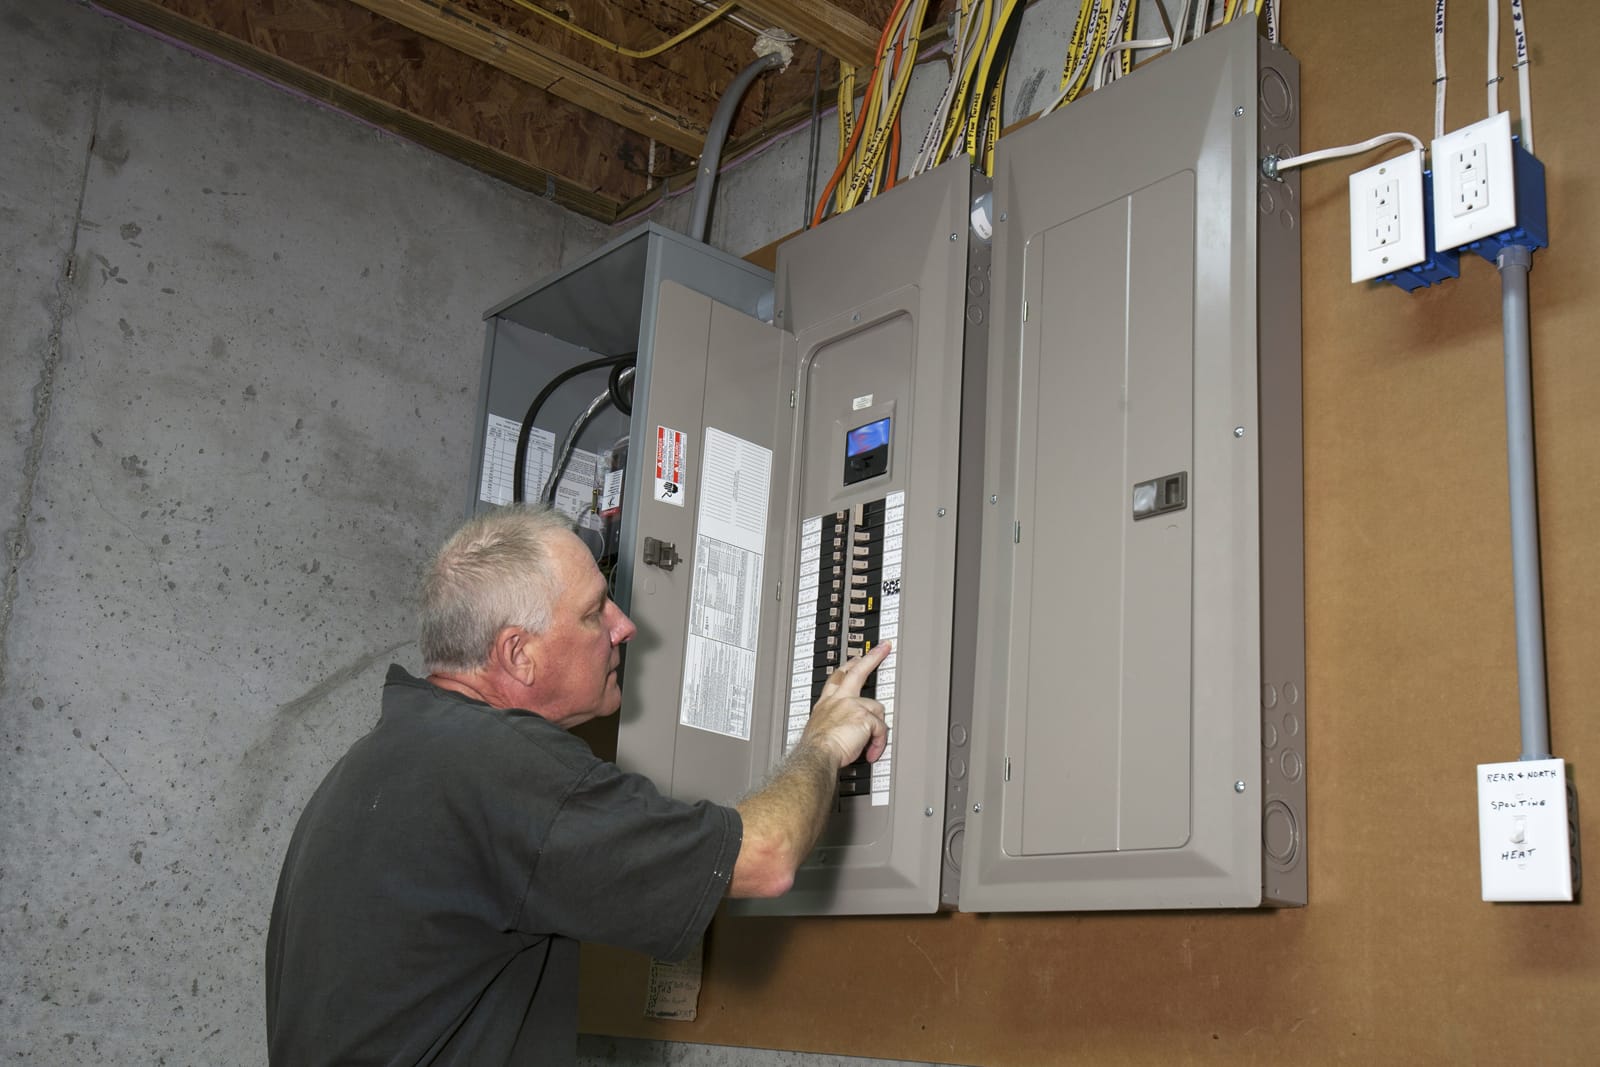 Man standing next to fuse box in a basement